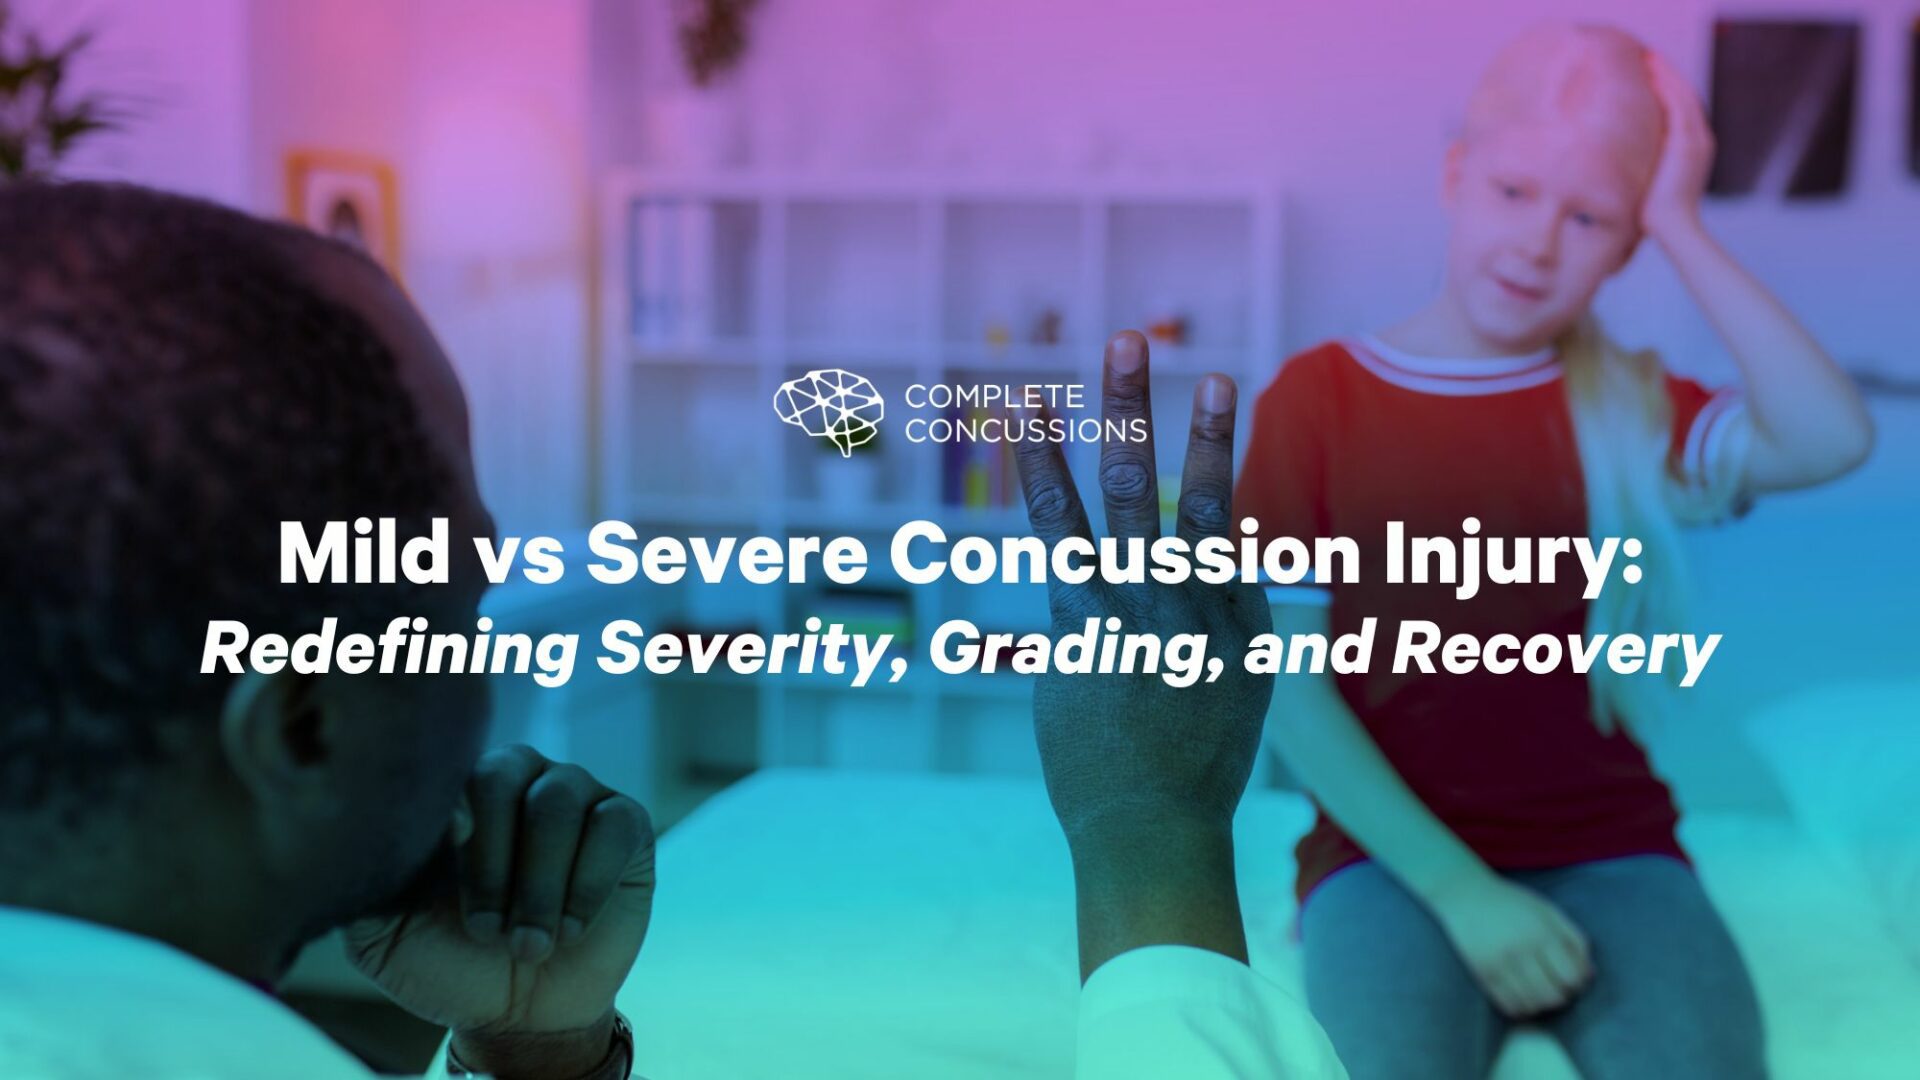 Mild vs Severe Concussion Injury: Redefining Severity, Grading, and Recovery